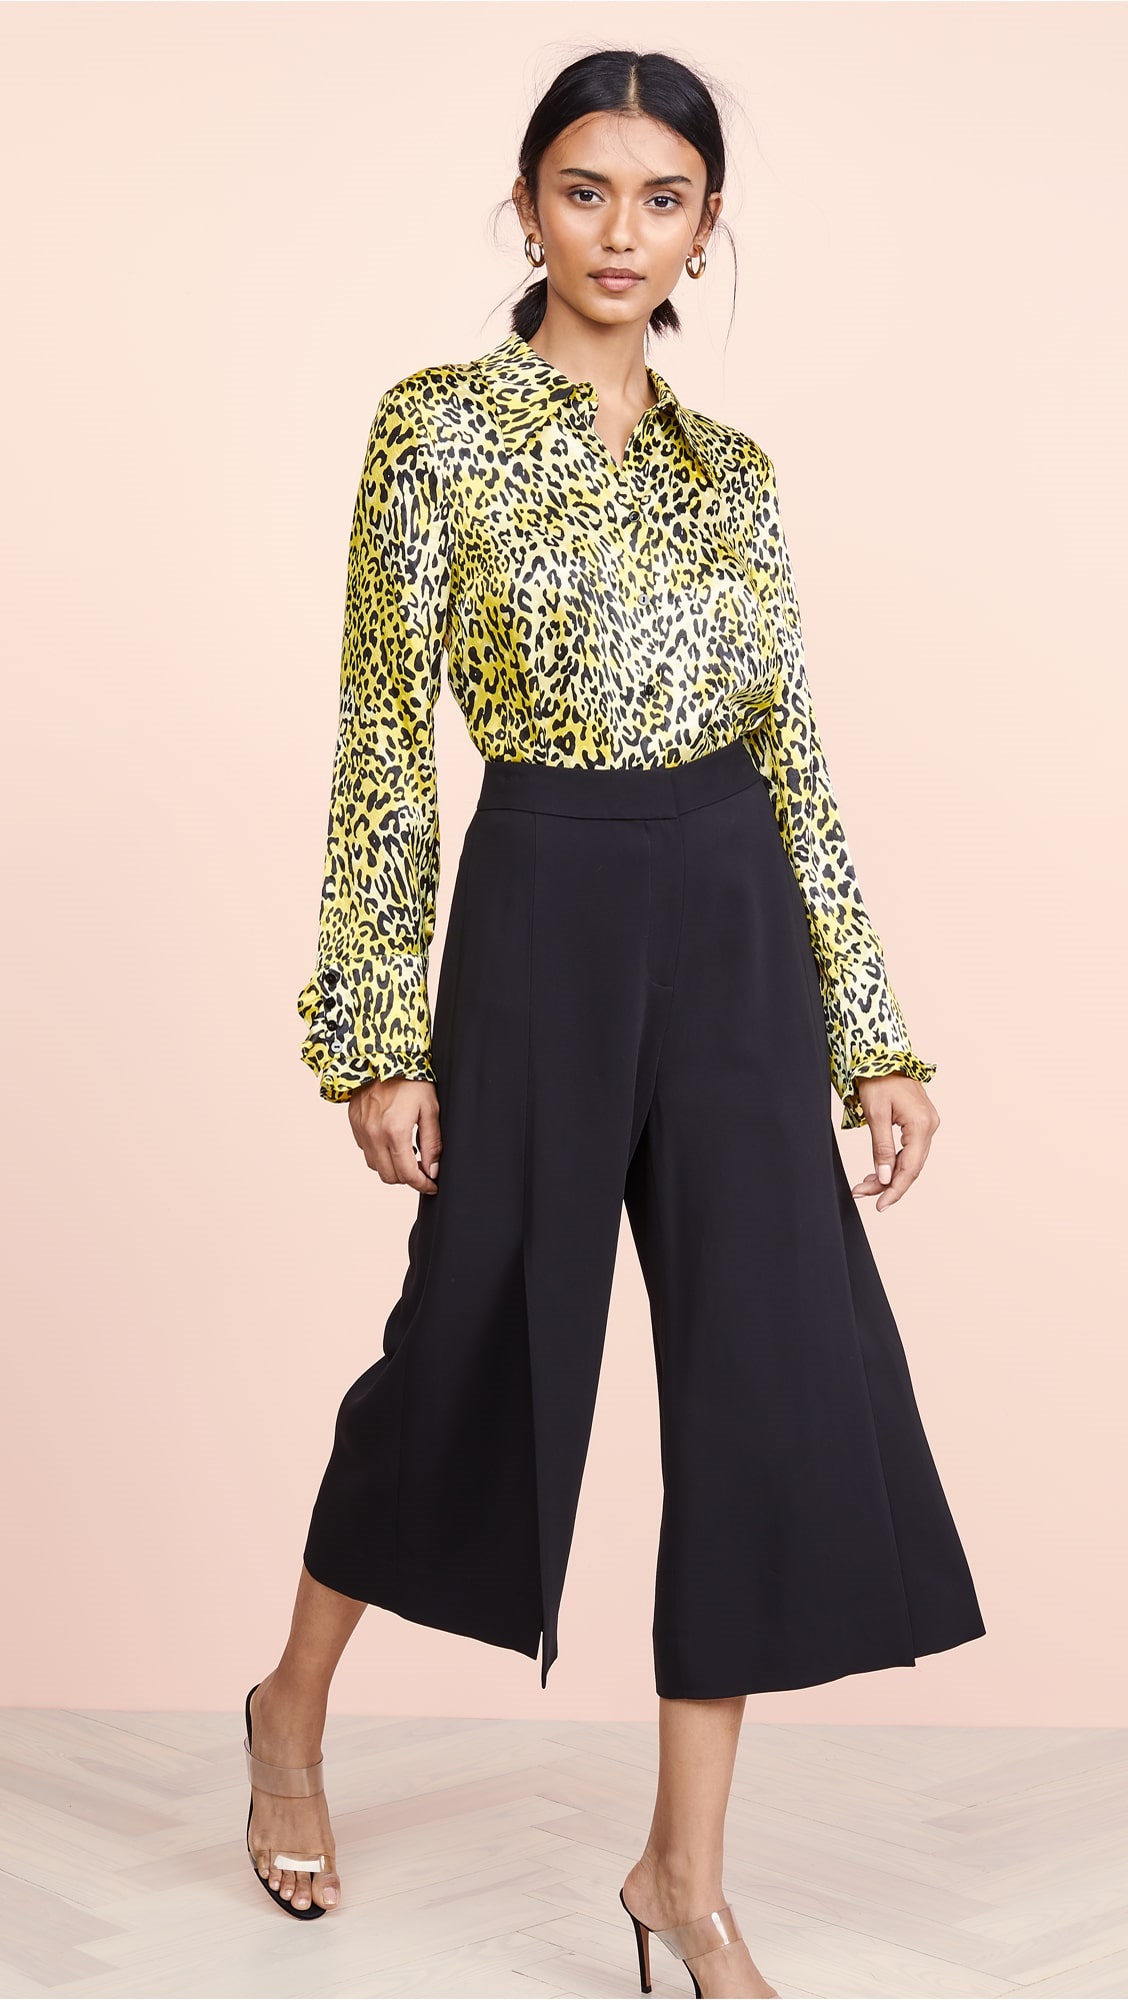 How To Look Stylish at the Office for Spring, cropped trousers and print blouse, Kobi Halperin jamie black pants and yellow print blouse